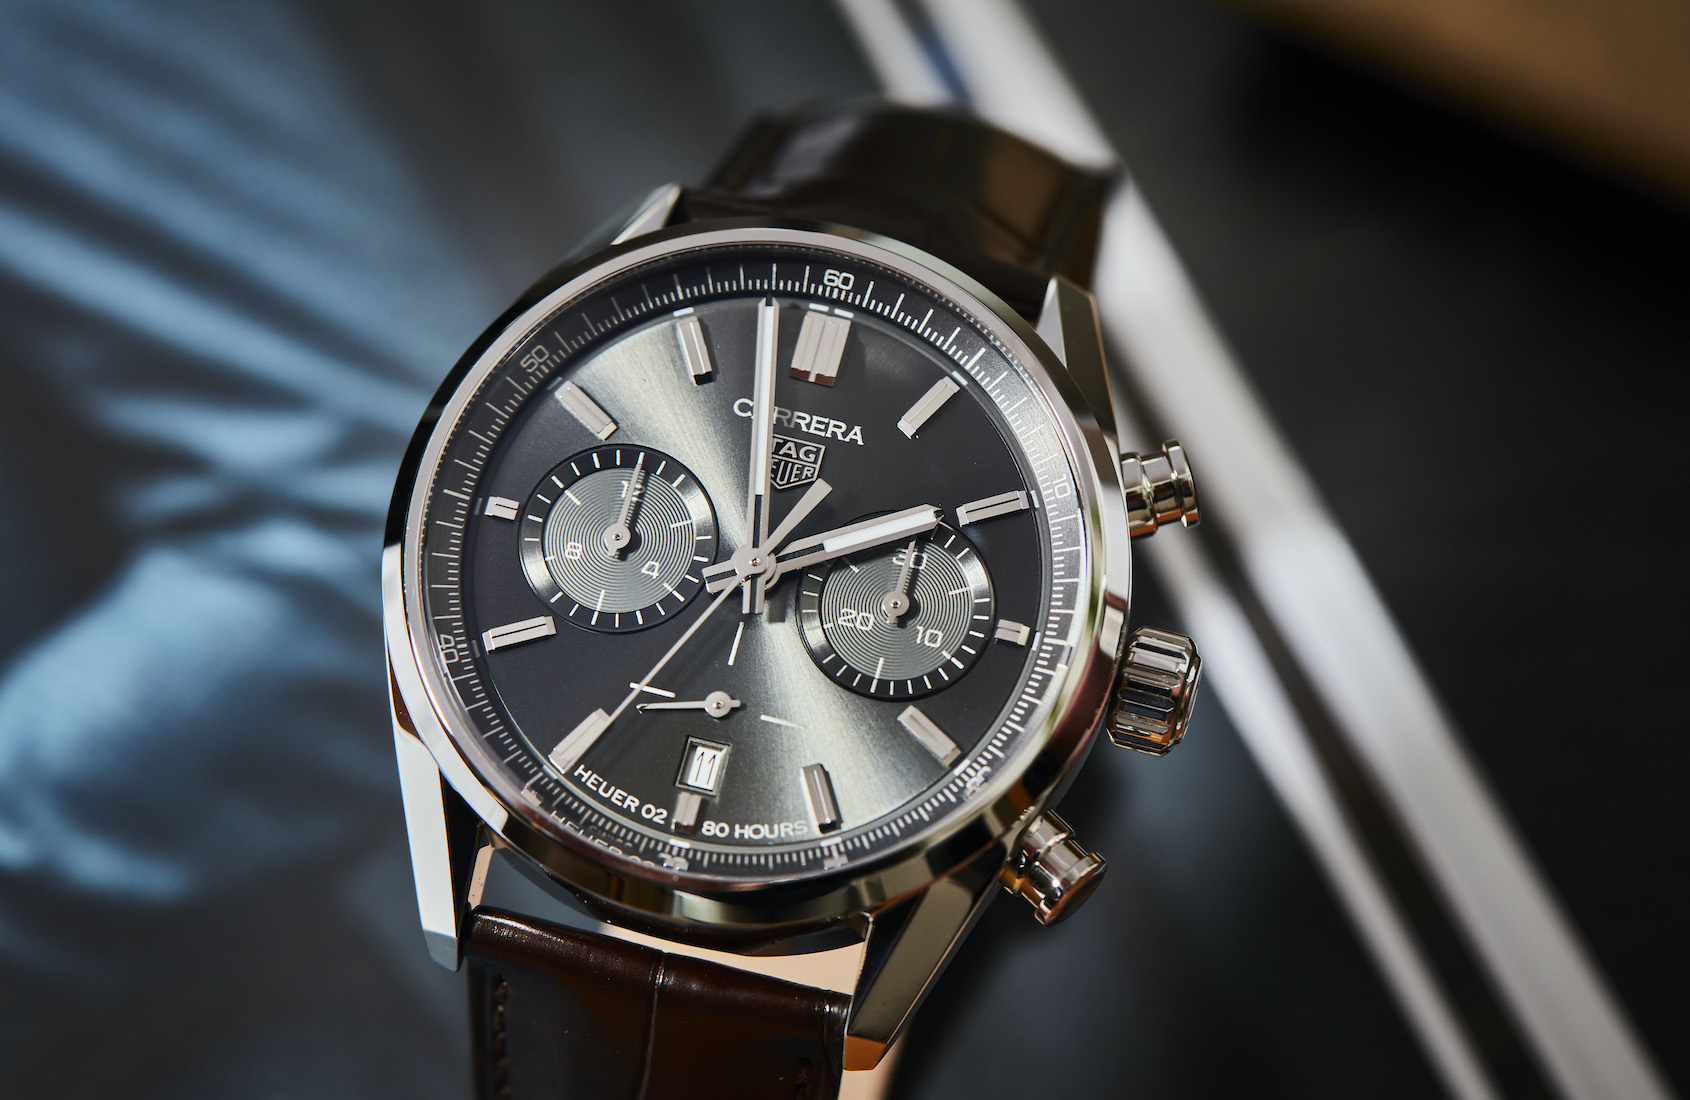 Hands-On: The New TAG Heuer Carrera Chronograph Hodinkee | vlr.eng.br